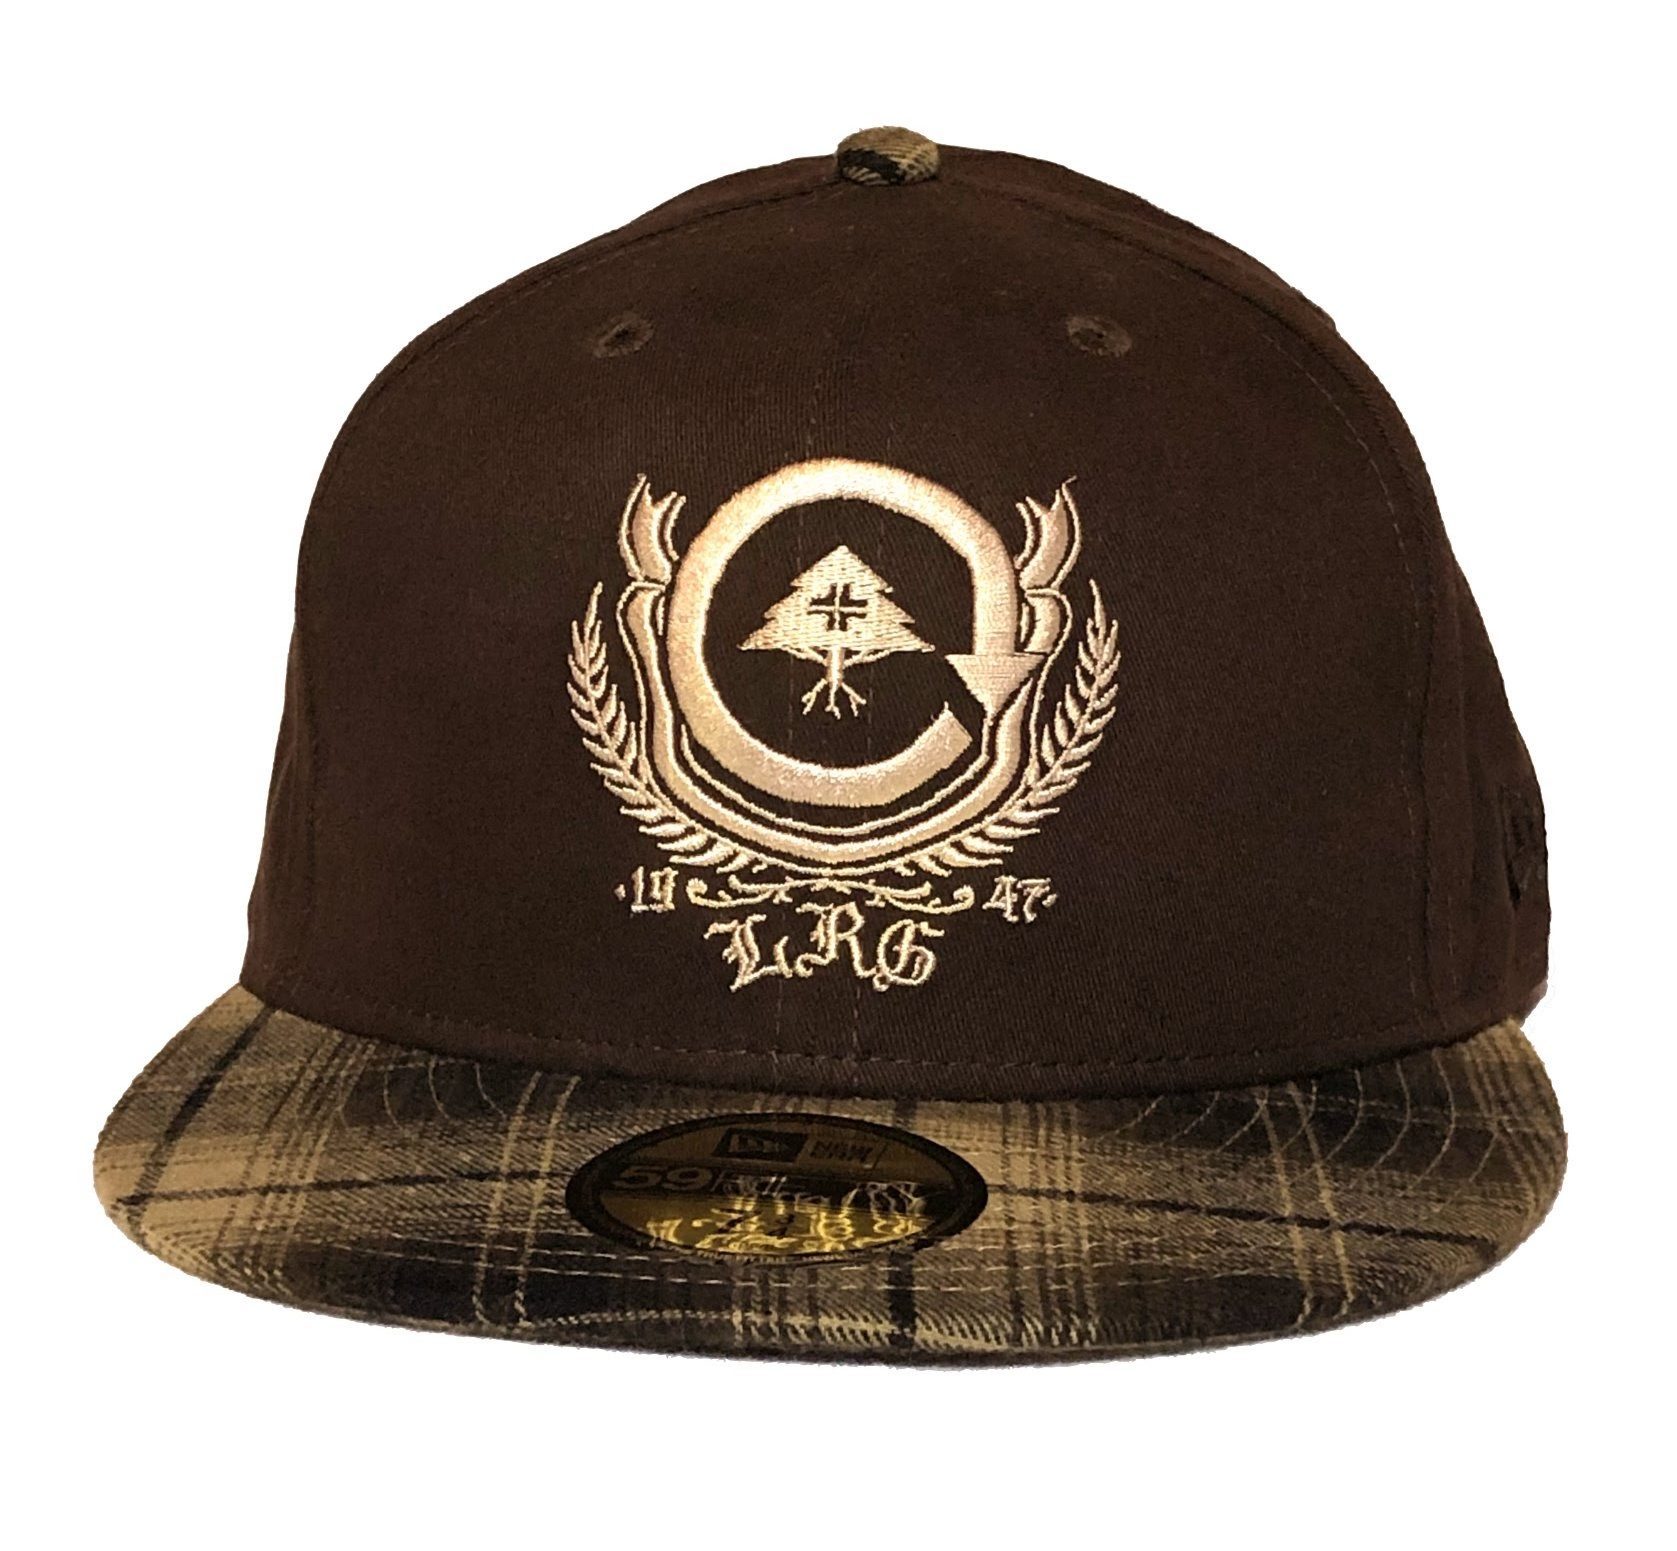 New Era 59Fifty LRG Fitted Cap H107011 / Color: Dark Chocolate 